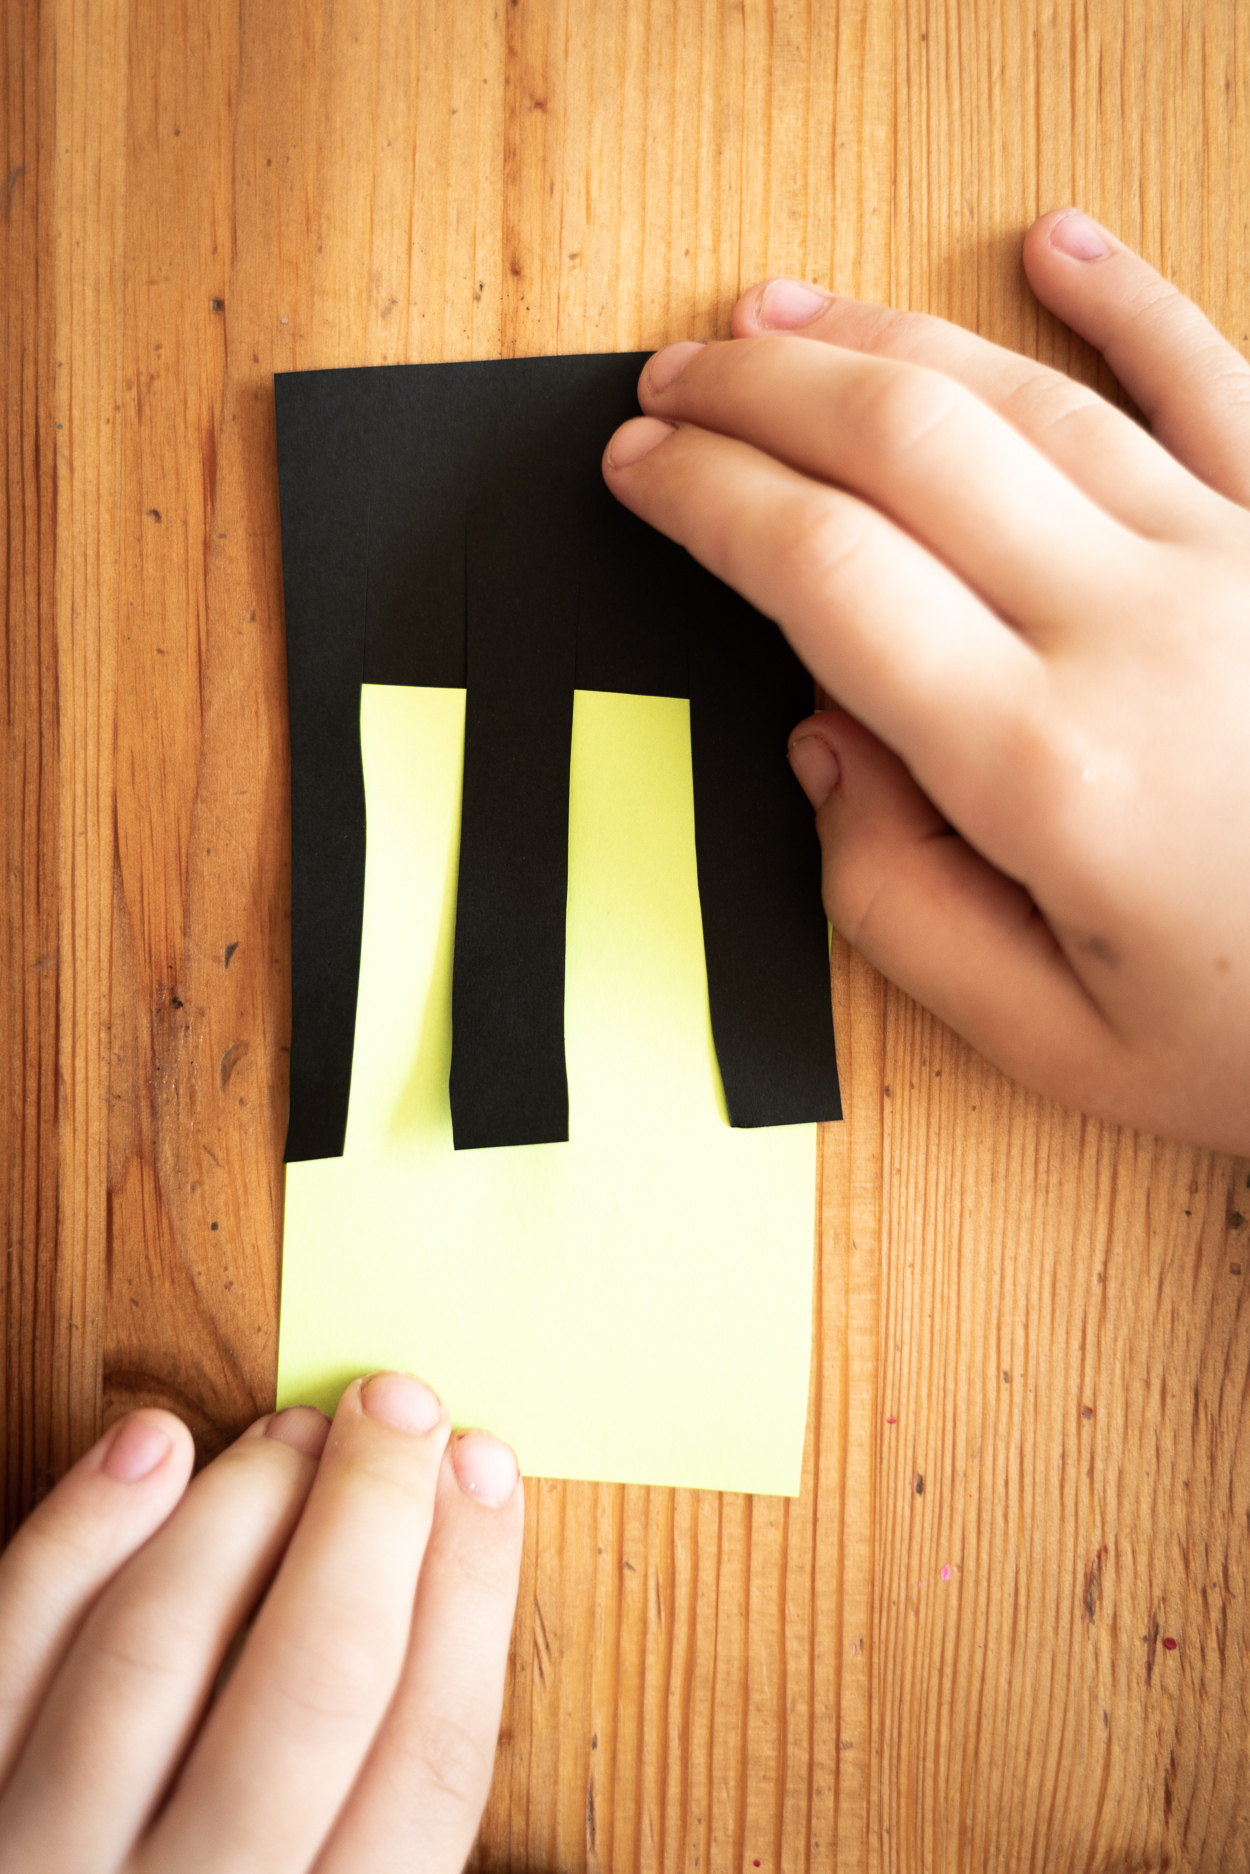 Cut out a rectangle of black paper and put it on a sheet of neon green paper, trace it with a pencil, cut out the rectangle. Take a black rectangle and cut long fringe in it, then put this piece of paper on your bright neon rectangle. Glue the black fringe to the neon rectangle on both sides.